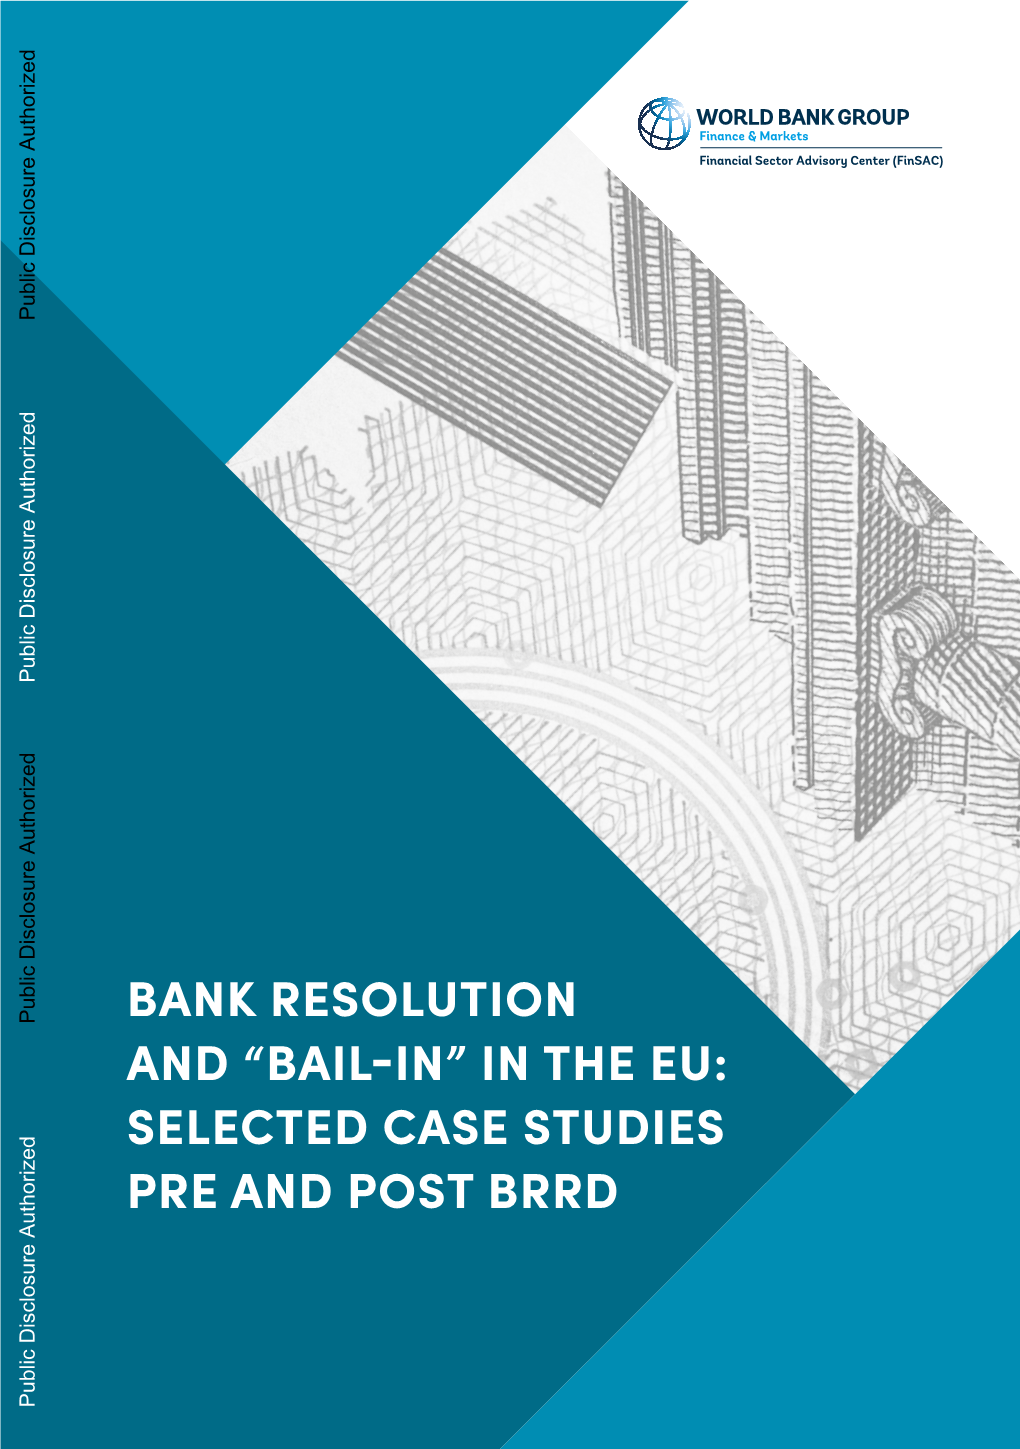 'Bail-In' in the EU: Selected Case Studies Pre and Post BRRD